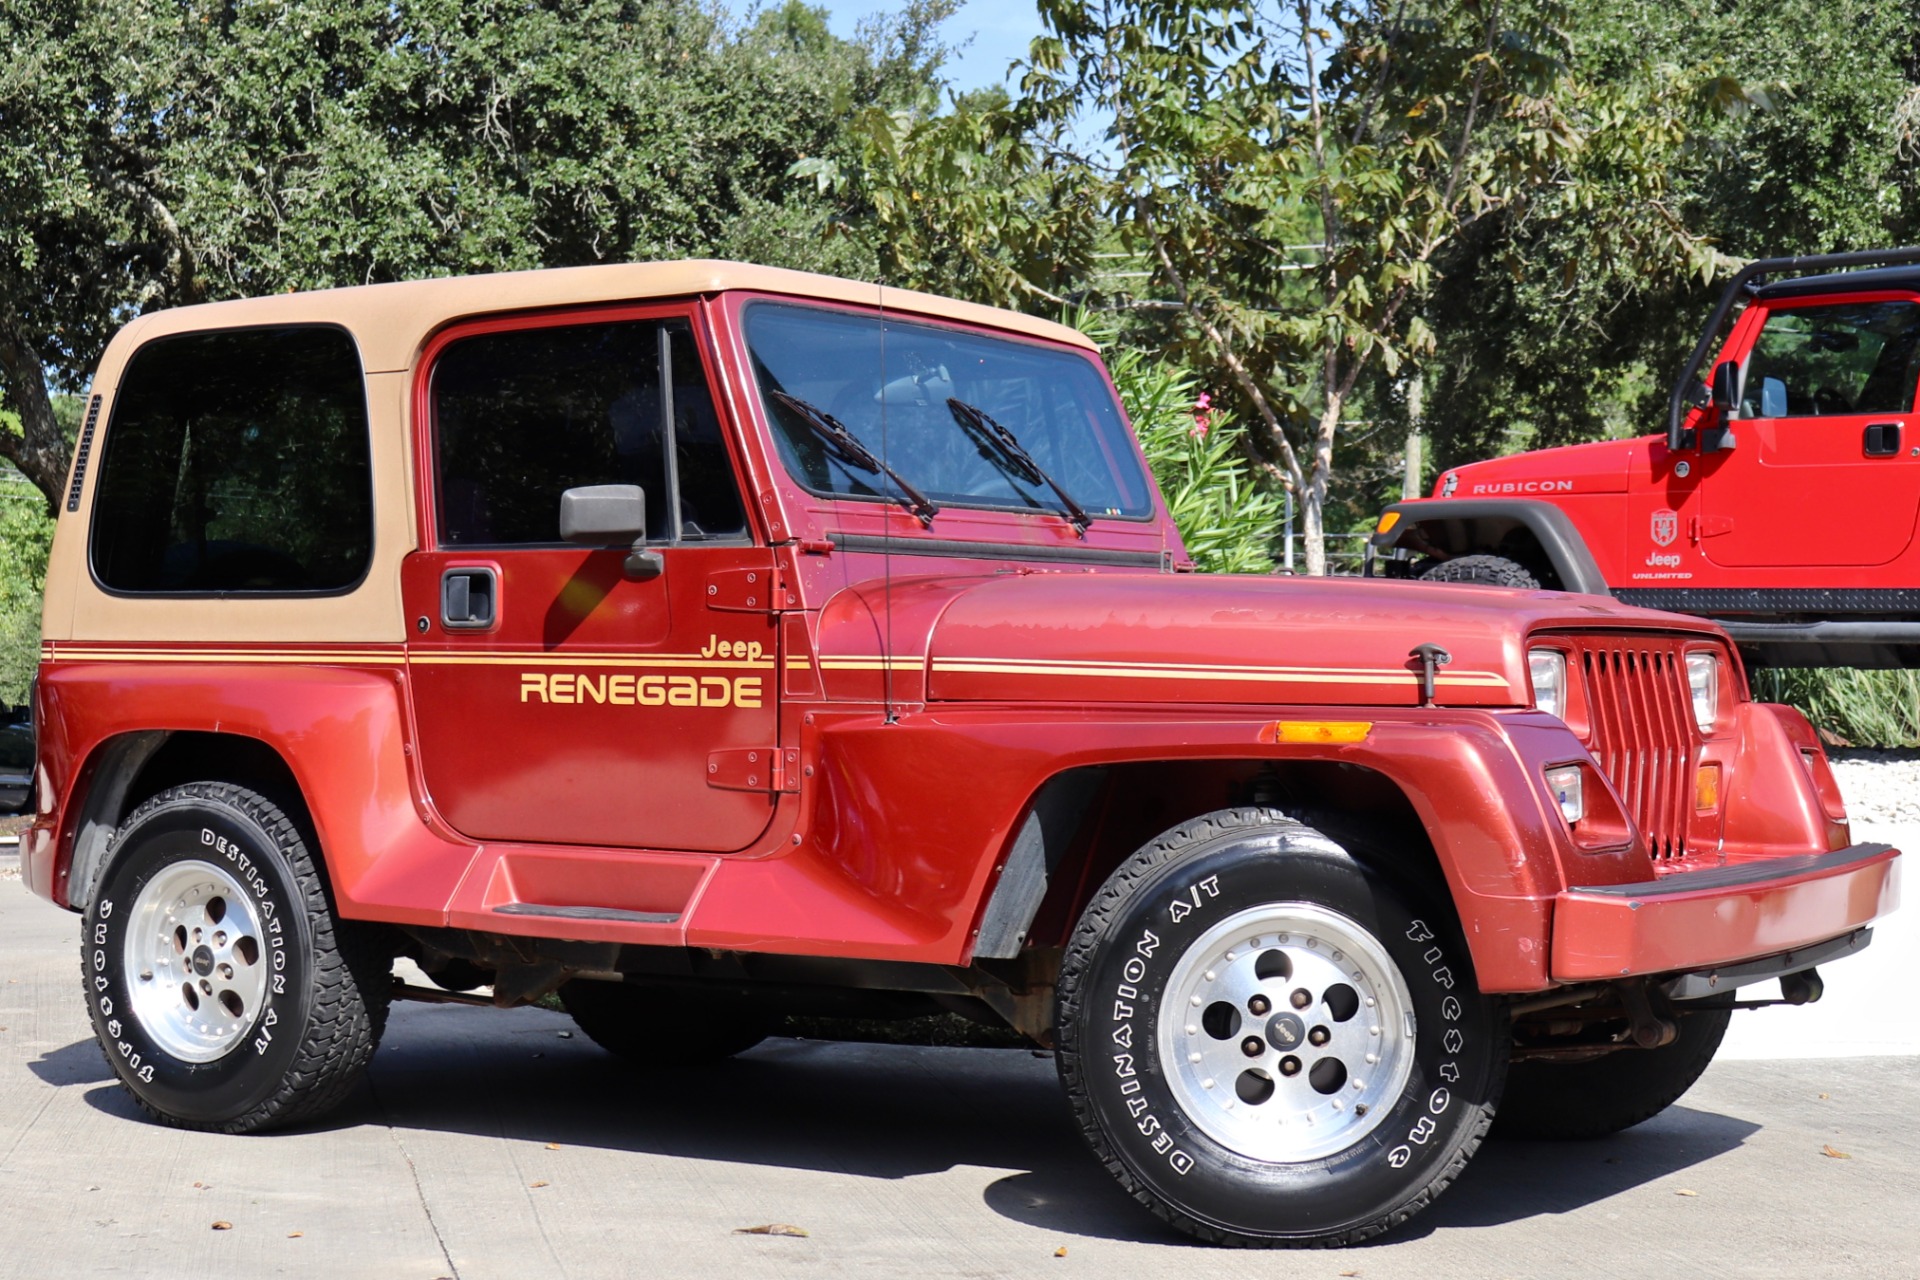 Used 1992 Jeep Wrangler Renegade For Sale ($14,995) | Select Jeeps Inc.  Stock #527552